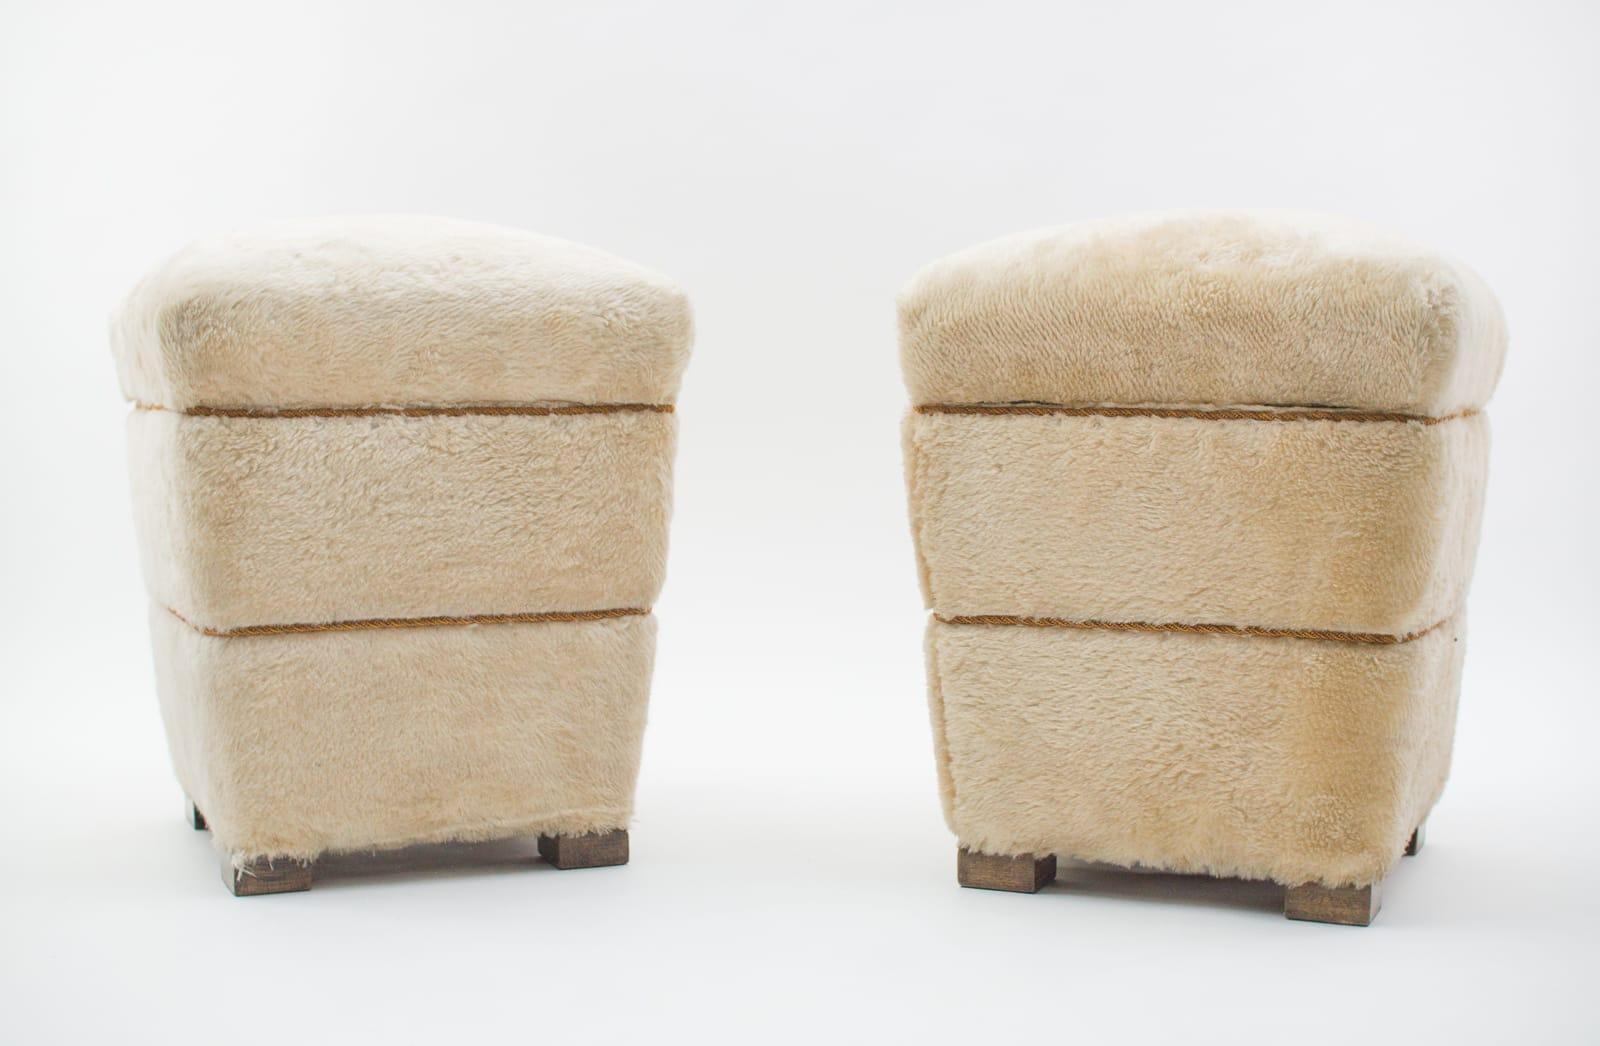 Two plush stools with storage, 1950s France

Very decorative. Very fluffy. With storage space. In one there is a water stain in the storage space, see photos. 

The stools do not smell, are clean and ready to live in immediately. 

We are